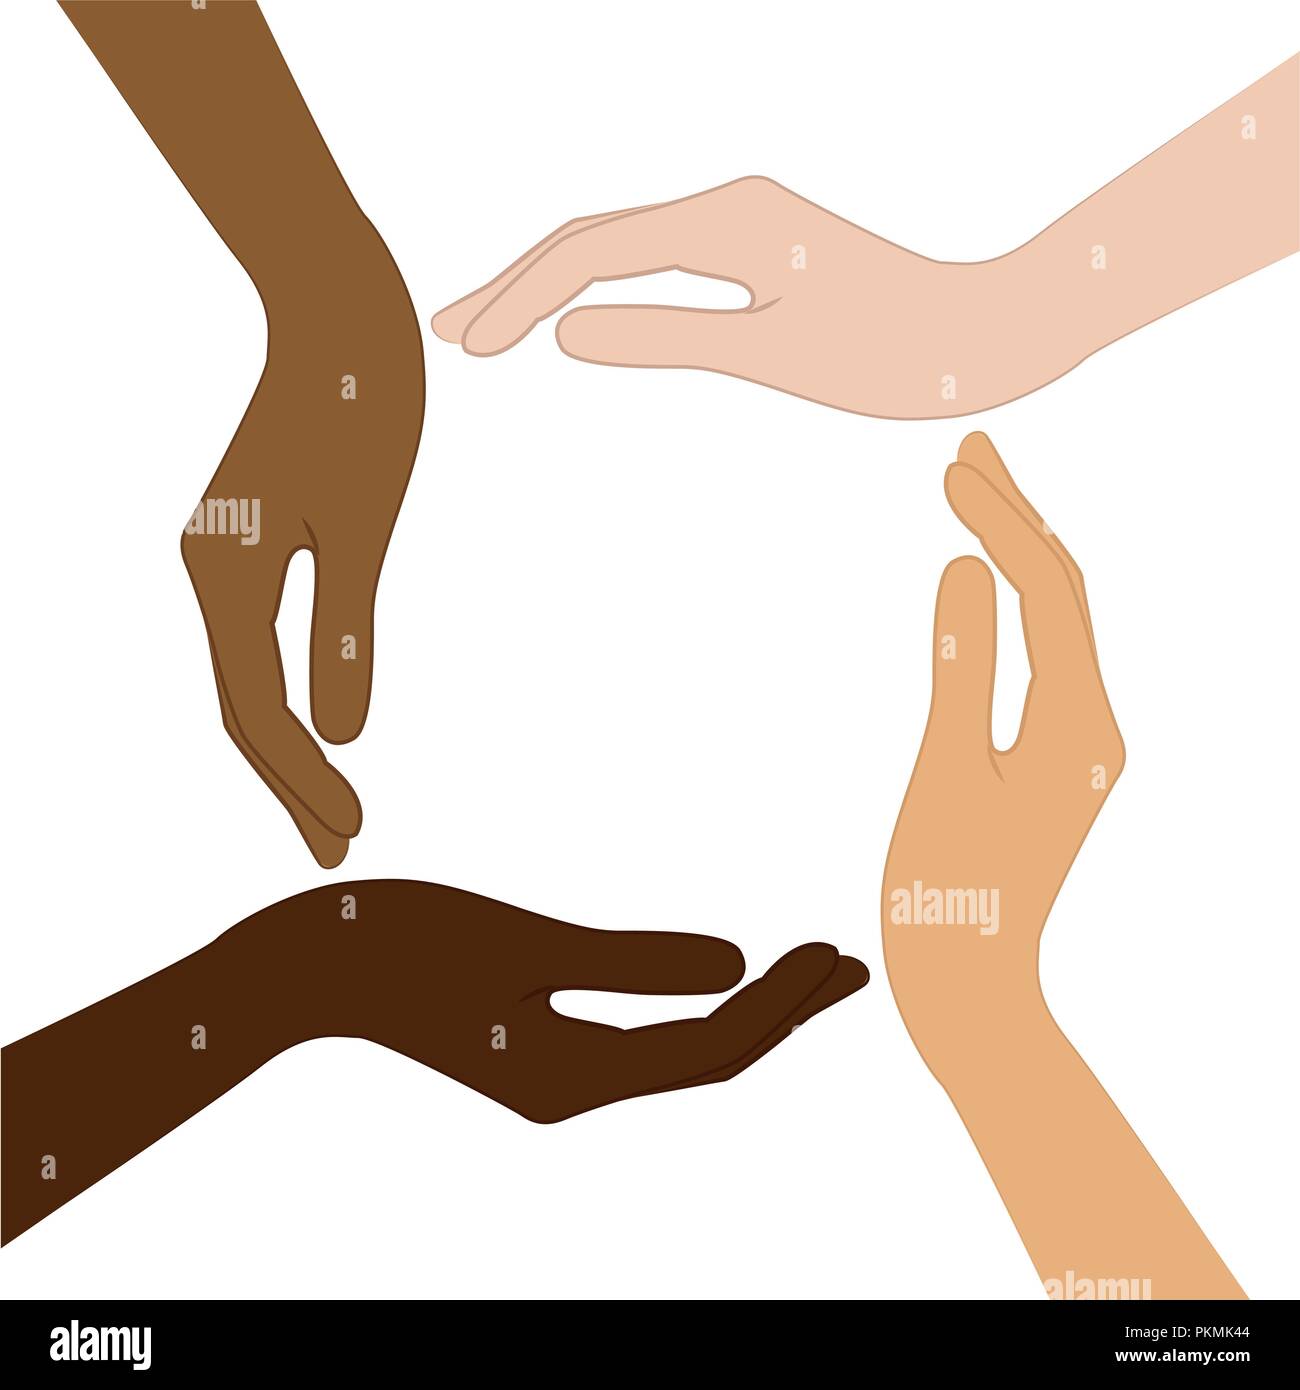 human hands with different skin color tolerance and anti racism concept vector illustration EPS10 Stock Vector